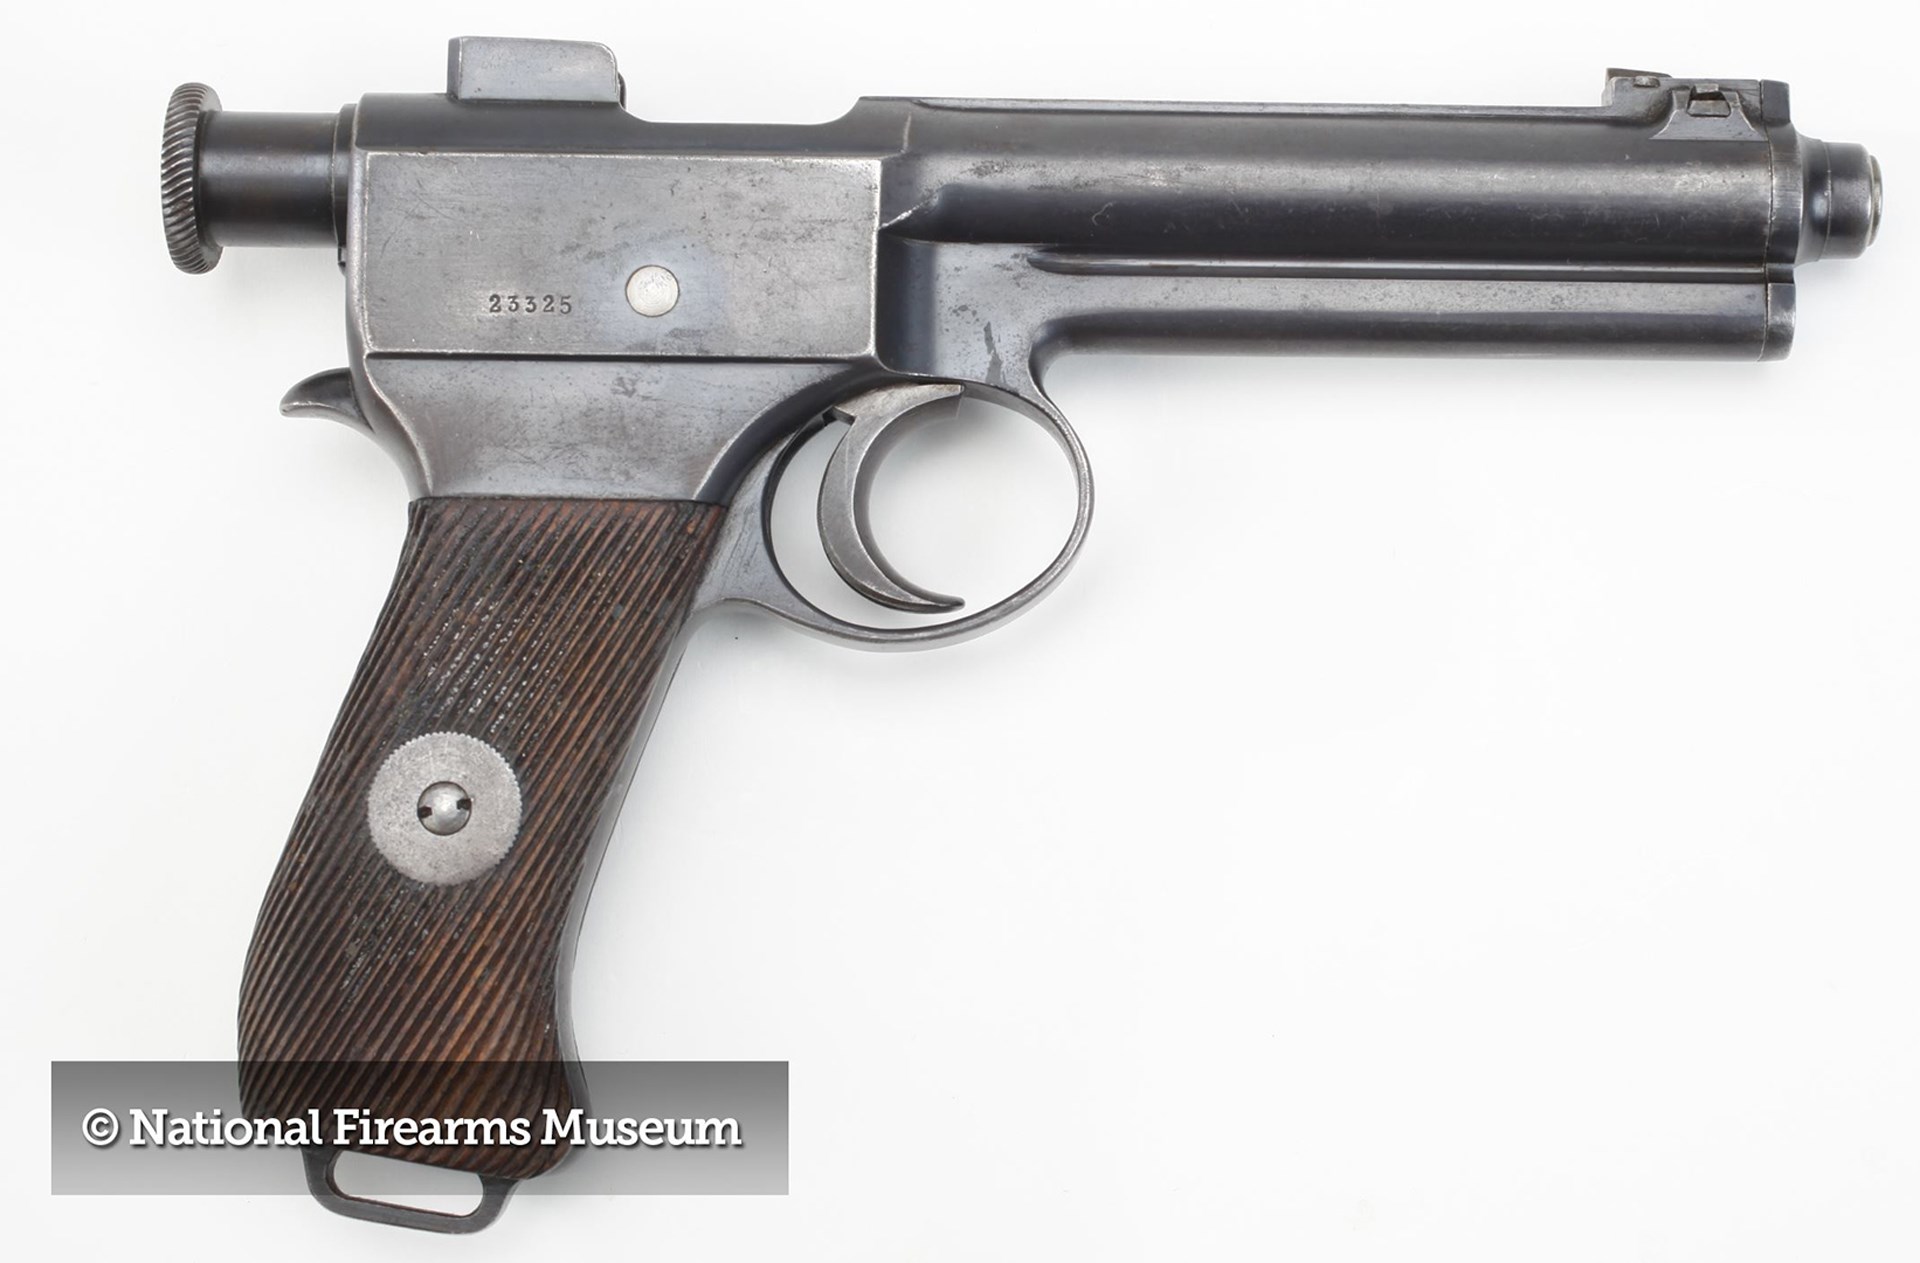 M1907 Roth-Steyr pistol semi-automatic rotary metal gun right-side view on white background text on image noting copyright National Firearms Museum